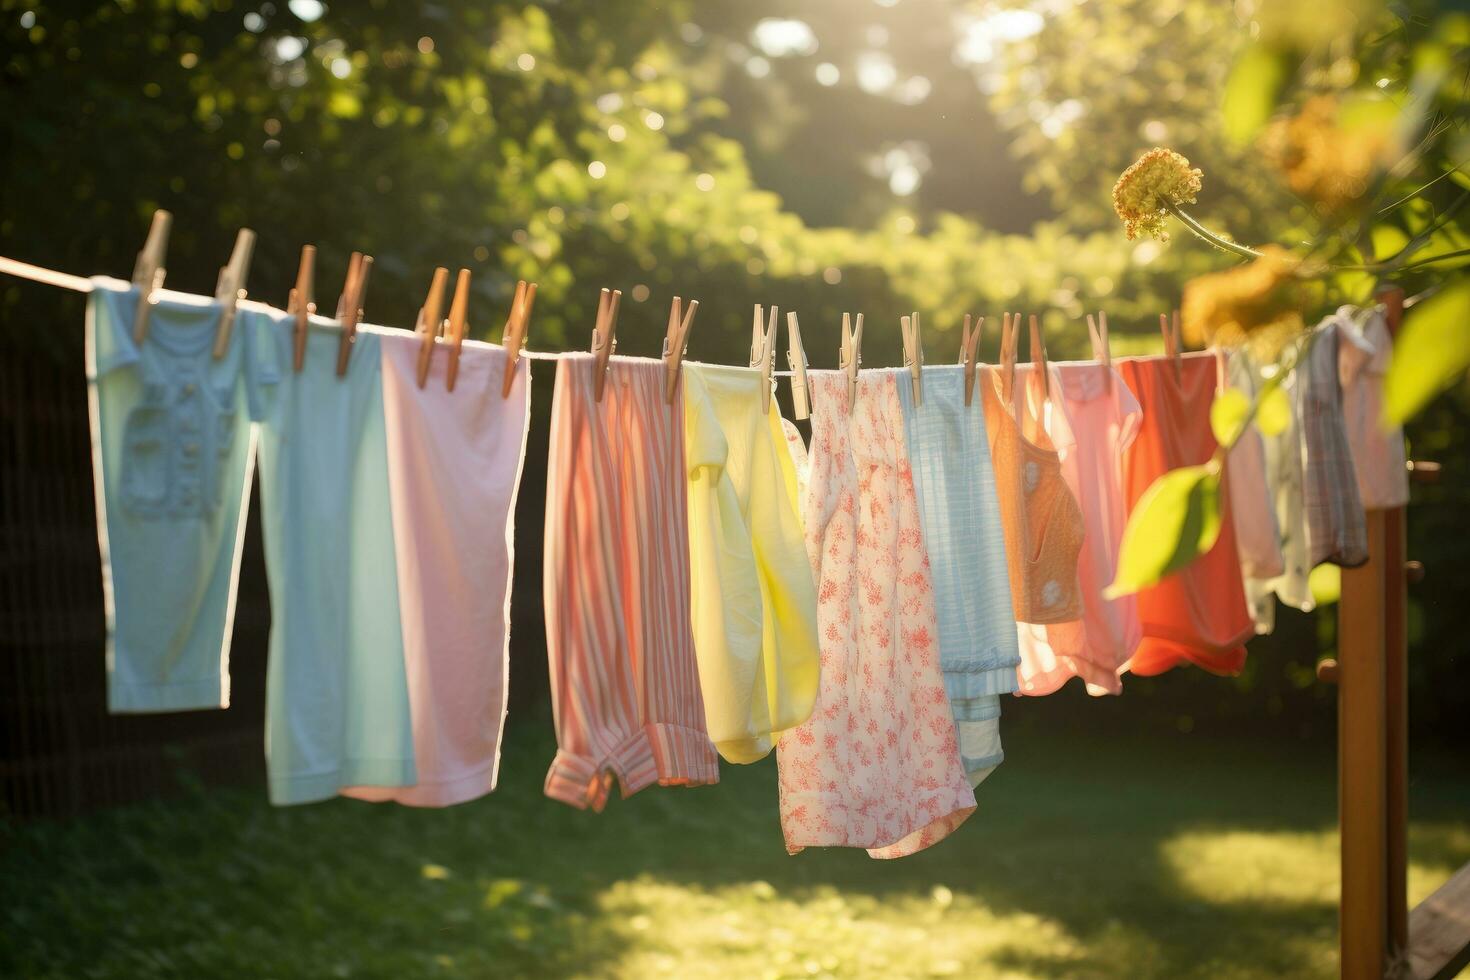 Laundry drying on a clothesline in the sun light. children's colorful clothing drying, AI Generated photo